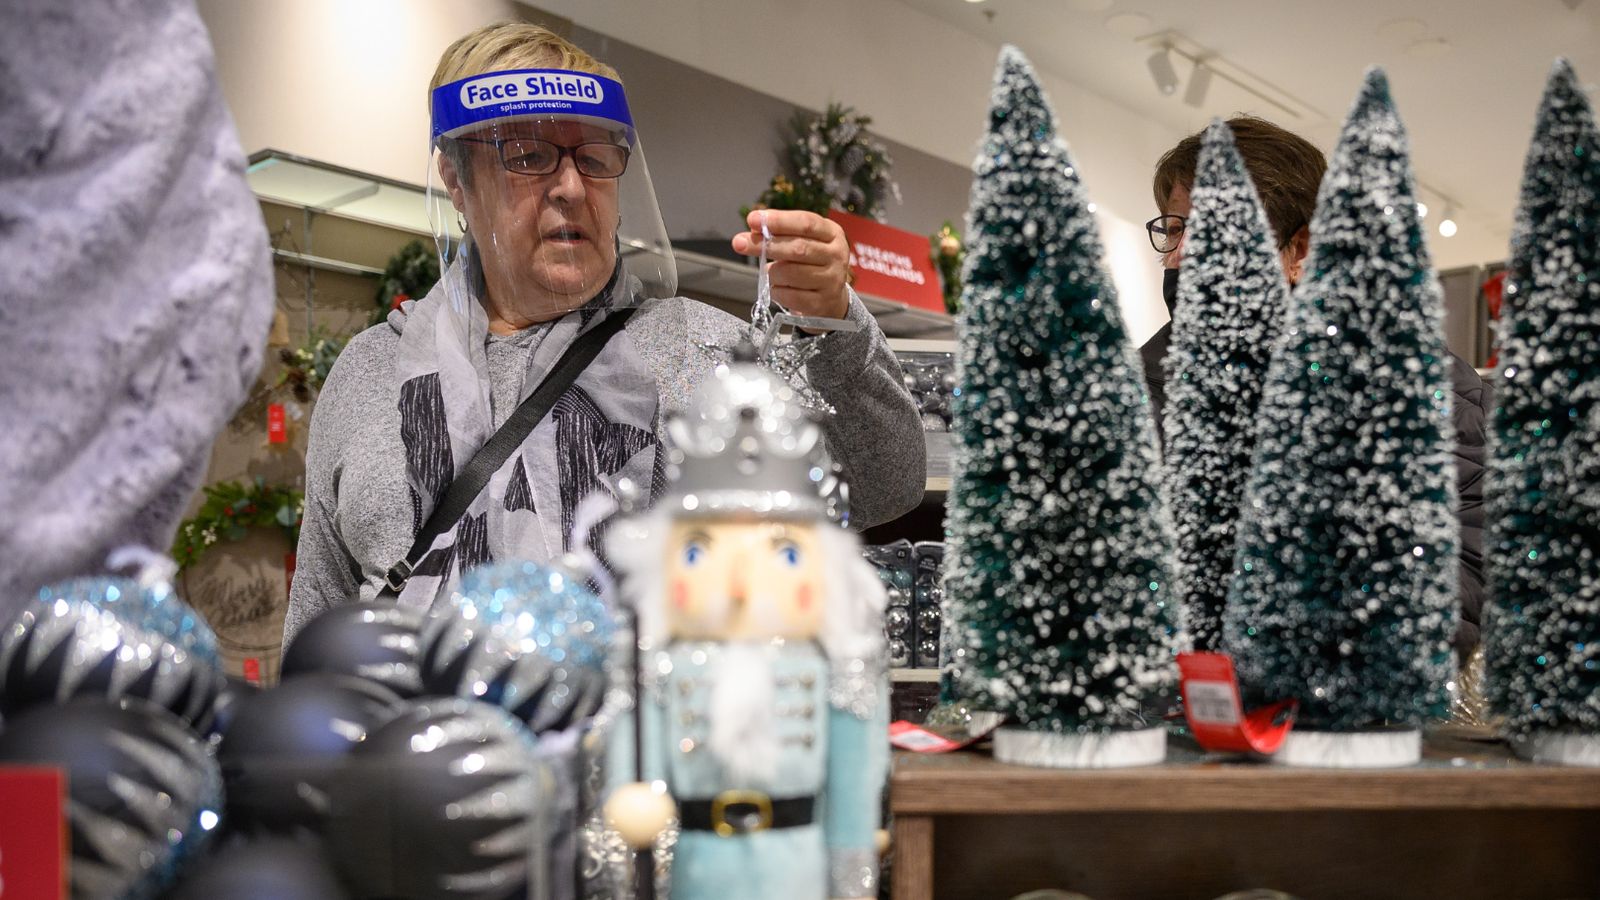 LONDON, ENGLAND - OCTOBER 20: A customer browses some of the festive items in the Christmas gift and decoration section in the branch of retailer Marks and Spencer at Westfield White City on October 20, 2020 in London, England. The high street store has announced that searches for Christmas-related items have tripled on previous years. The British Retail Consortium (BRC) has launched a new “Shop early, Start wrapping, Enjoy Christmas” national campaign, encouraging British consumers to start their festive shopping early. The aim is to both spread the amount of footfall in stores to aid social distancing, and to ensure that retail stores survive the Christmas period, despite COVID-19 preventative measures. (Photo by Leon Neal/Getty Images)